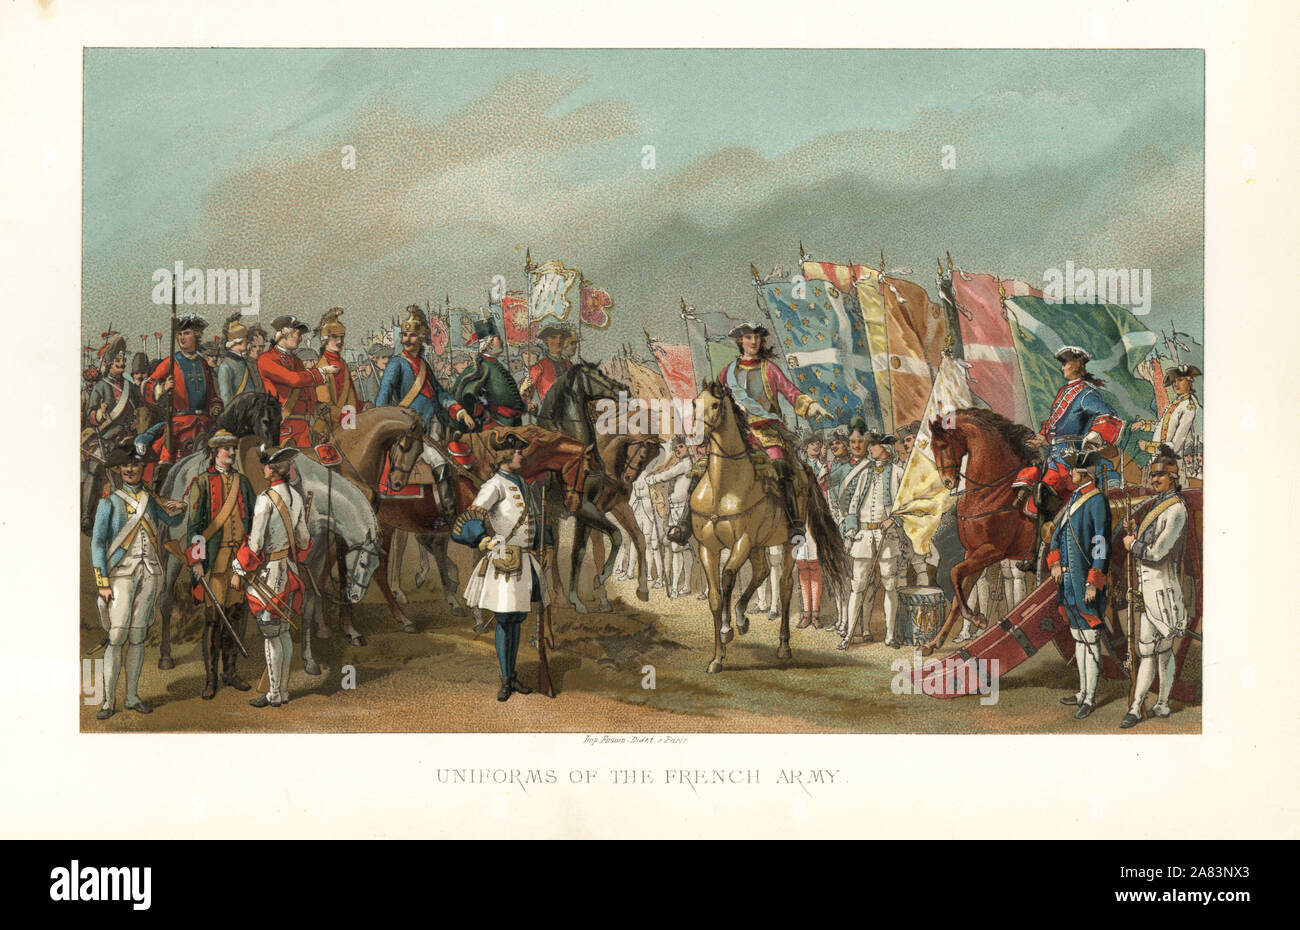 Uniforms of the French Army in the 18th century. Chromolithograph from Paul Lacroix' The Eighteenth Century: Its Institutions, Customs, and Costumes, London, 1876. Stock Photo